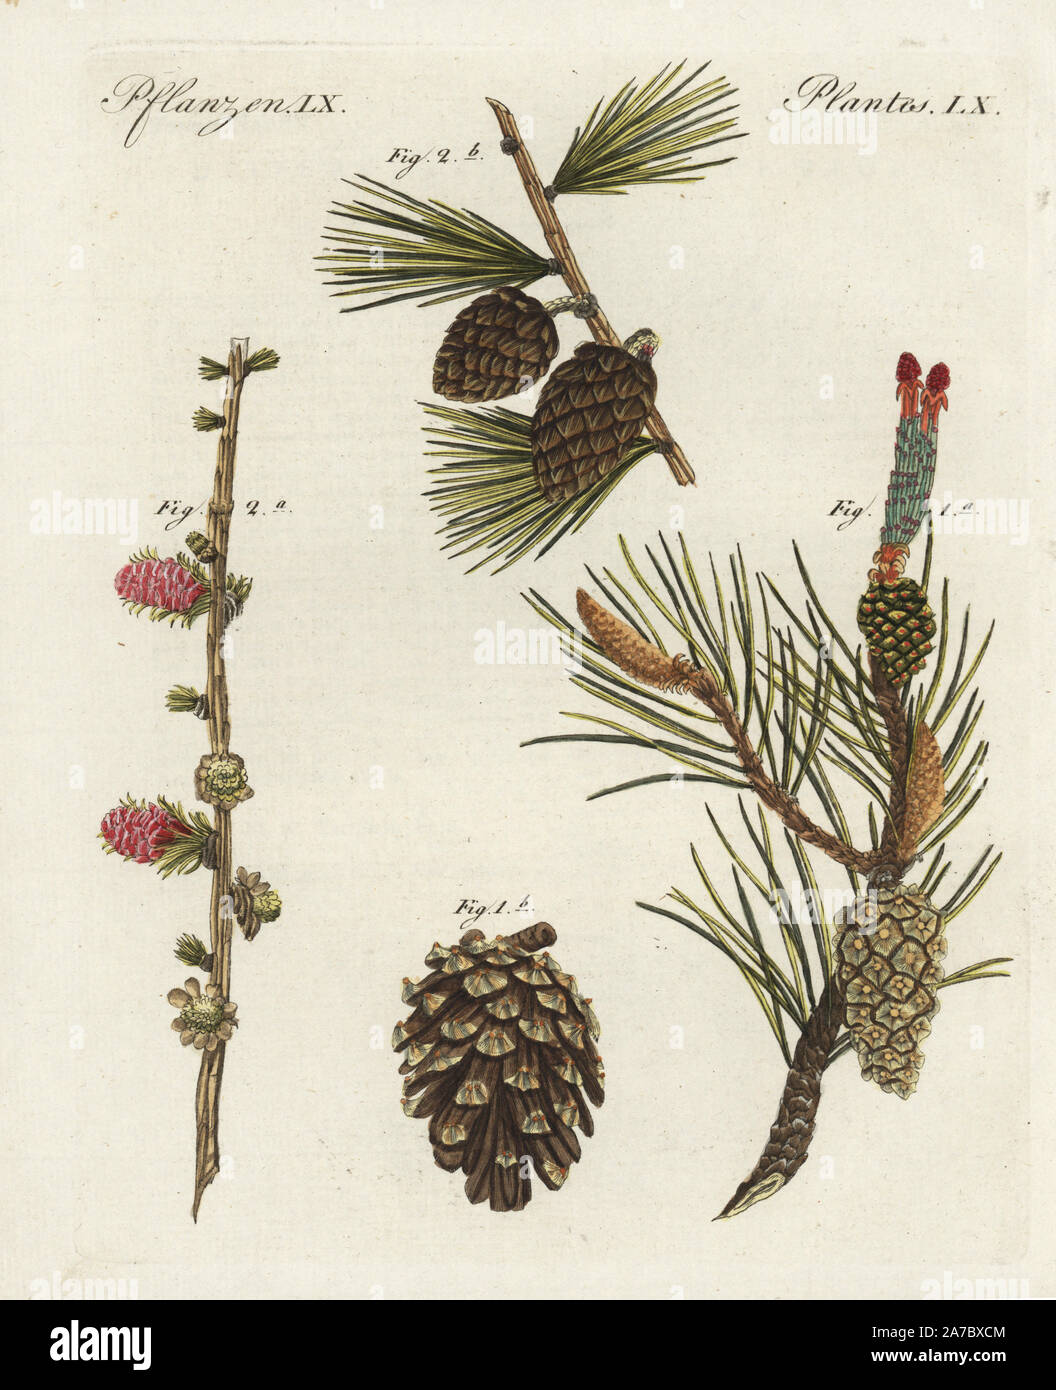 Scots pine tree, Pinus sylvestris, flower 1a and cone 1b, and common European larch tree, Larix decidua, flower 2a and cone 2b. Handcoloured copperplate engraving from Bertuch's 'Bilderbuch fur Kinder' (Picture Book for Children), Weimar, 1798. Friedrich Johann Bertuch (1747-1822) was a German publisher and man of arts most famous for his 12-volume encyclopedia for children illustrated with 1,200 engraved plates on natural history, science, costume, mythology, etc., published from 1790-1830. Stock Photo